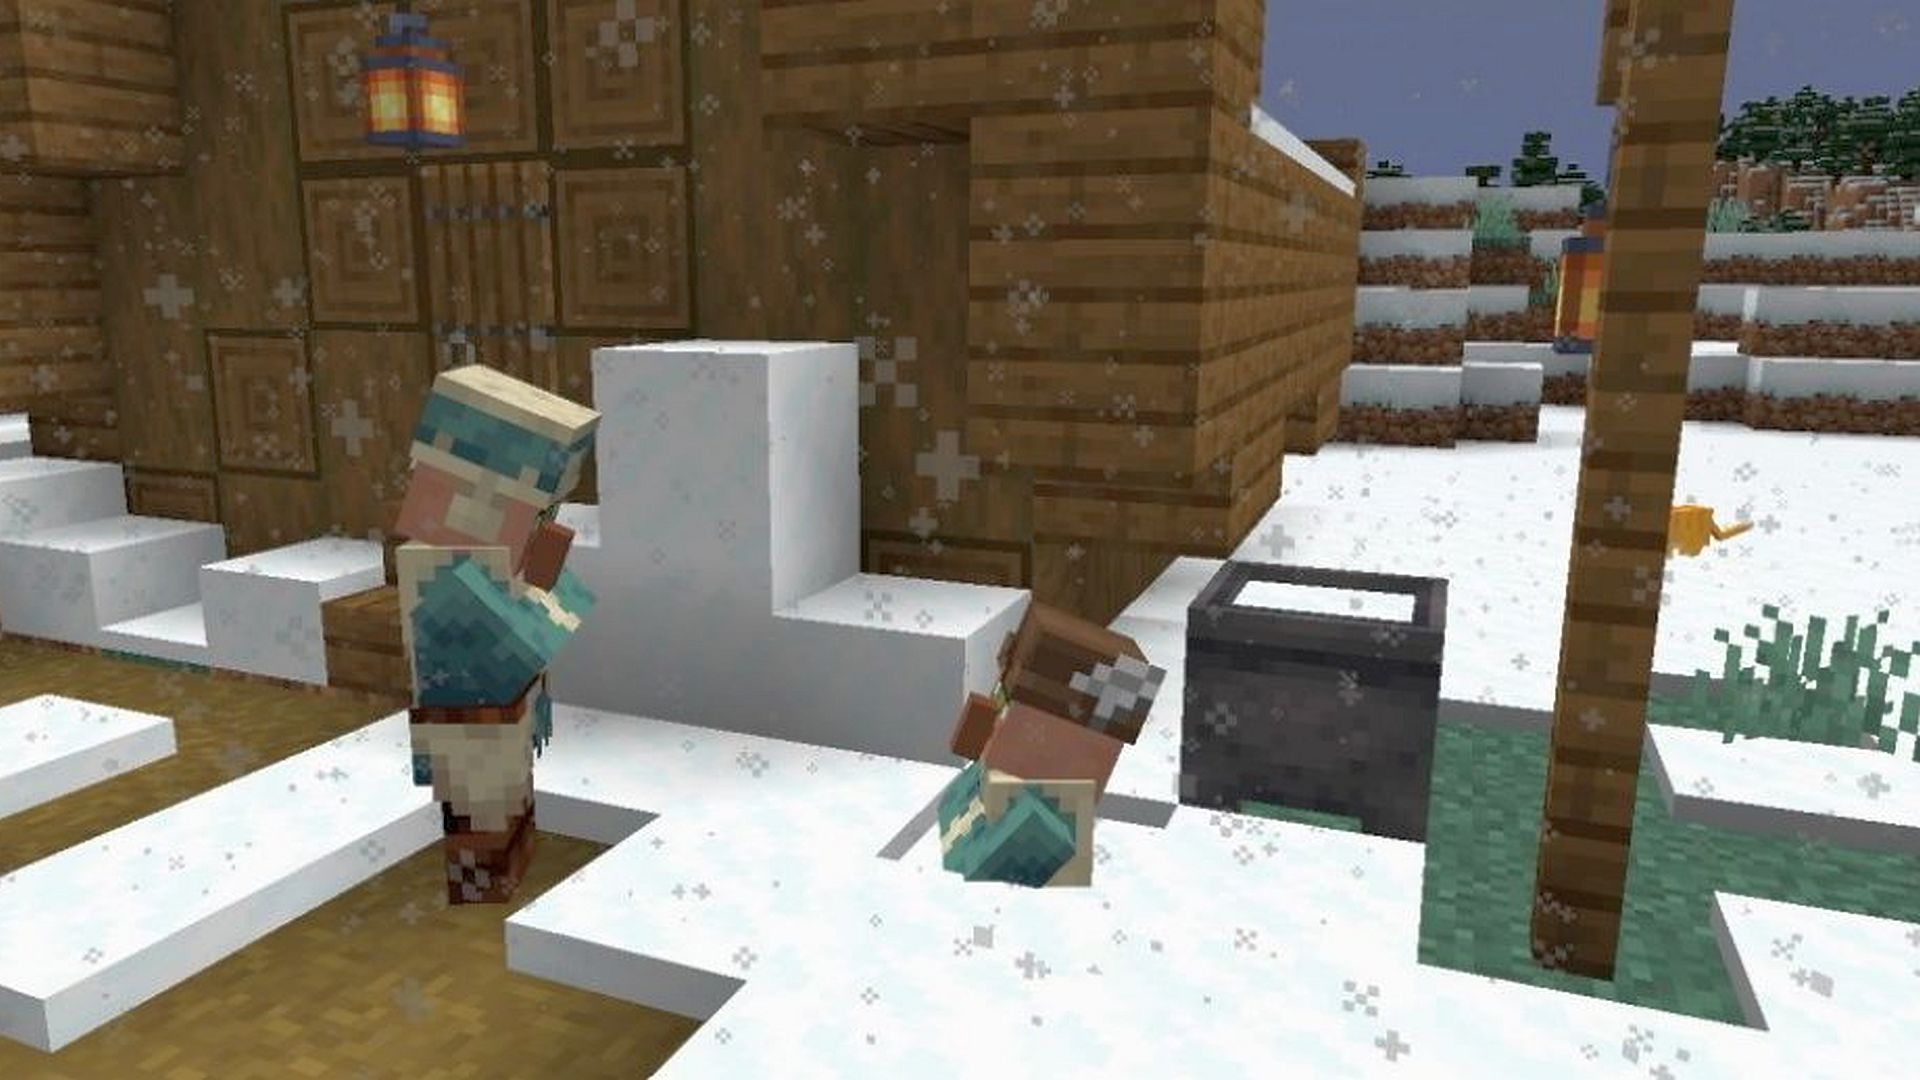 Minecraft's new snapshot means “snow is snowier now”